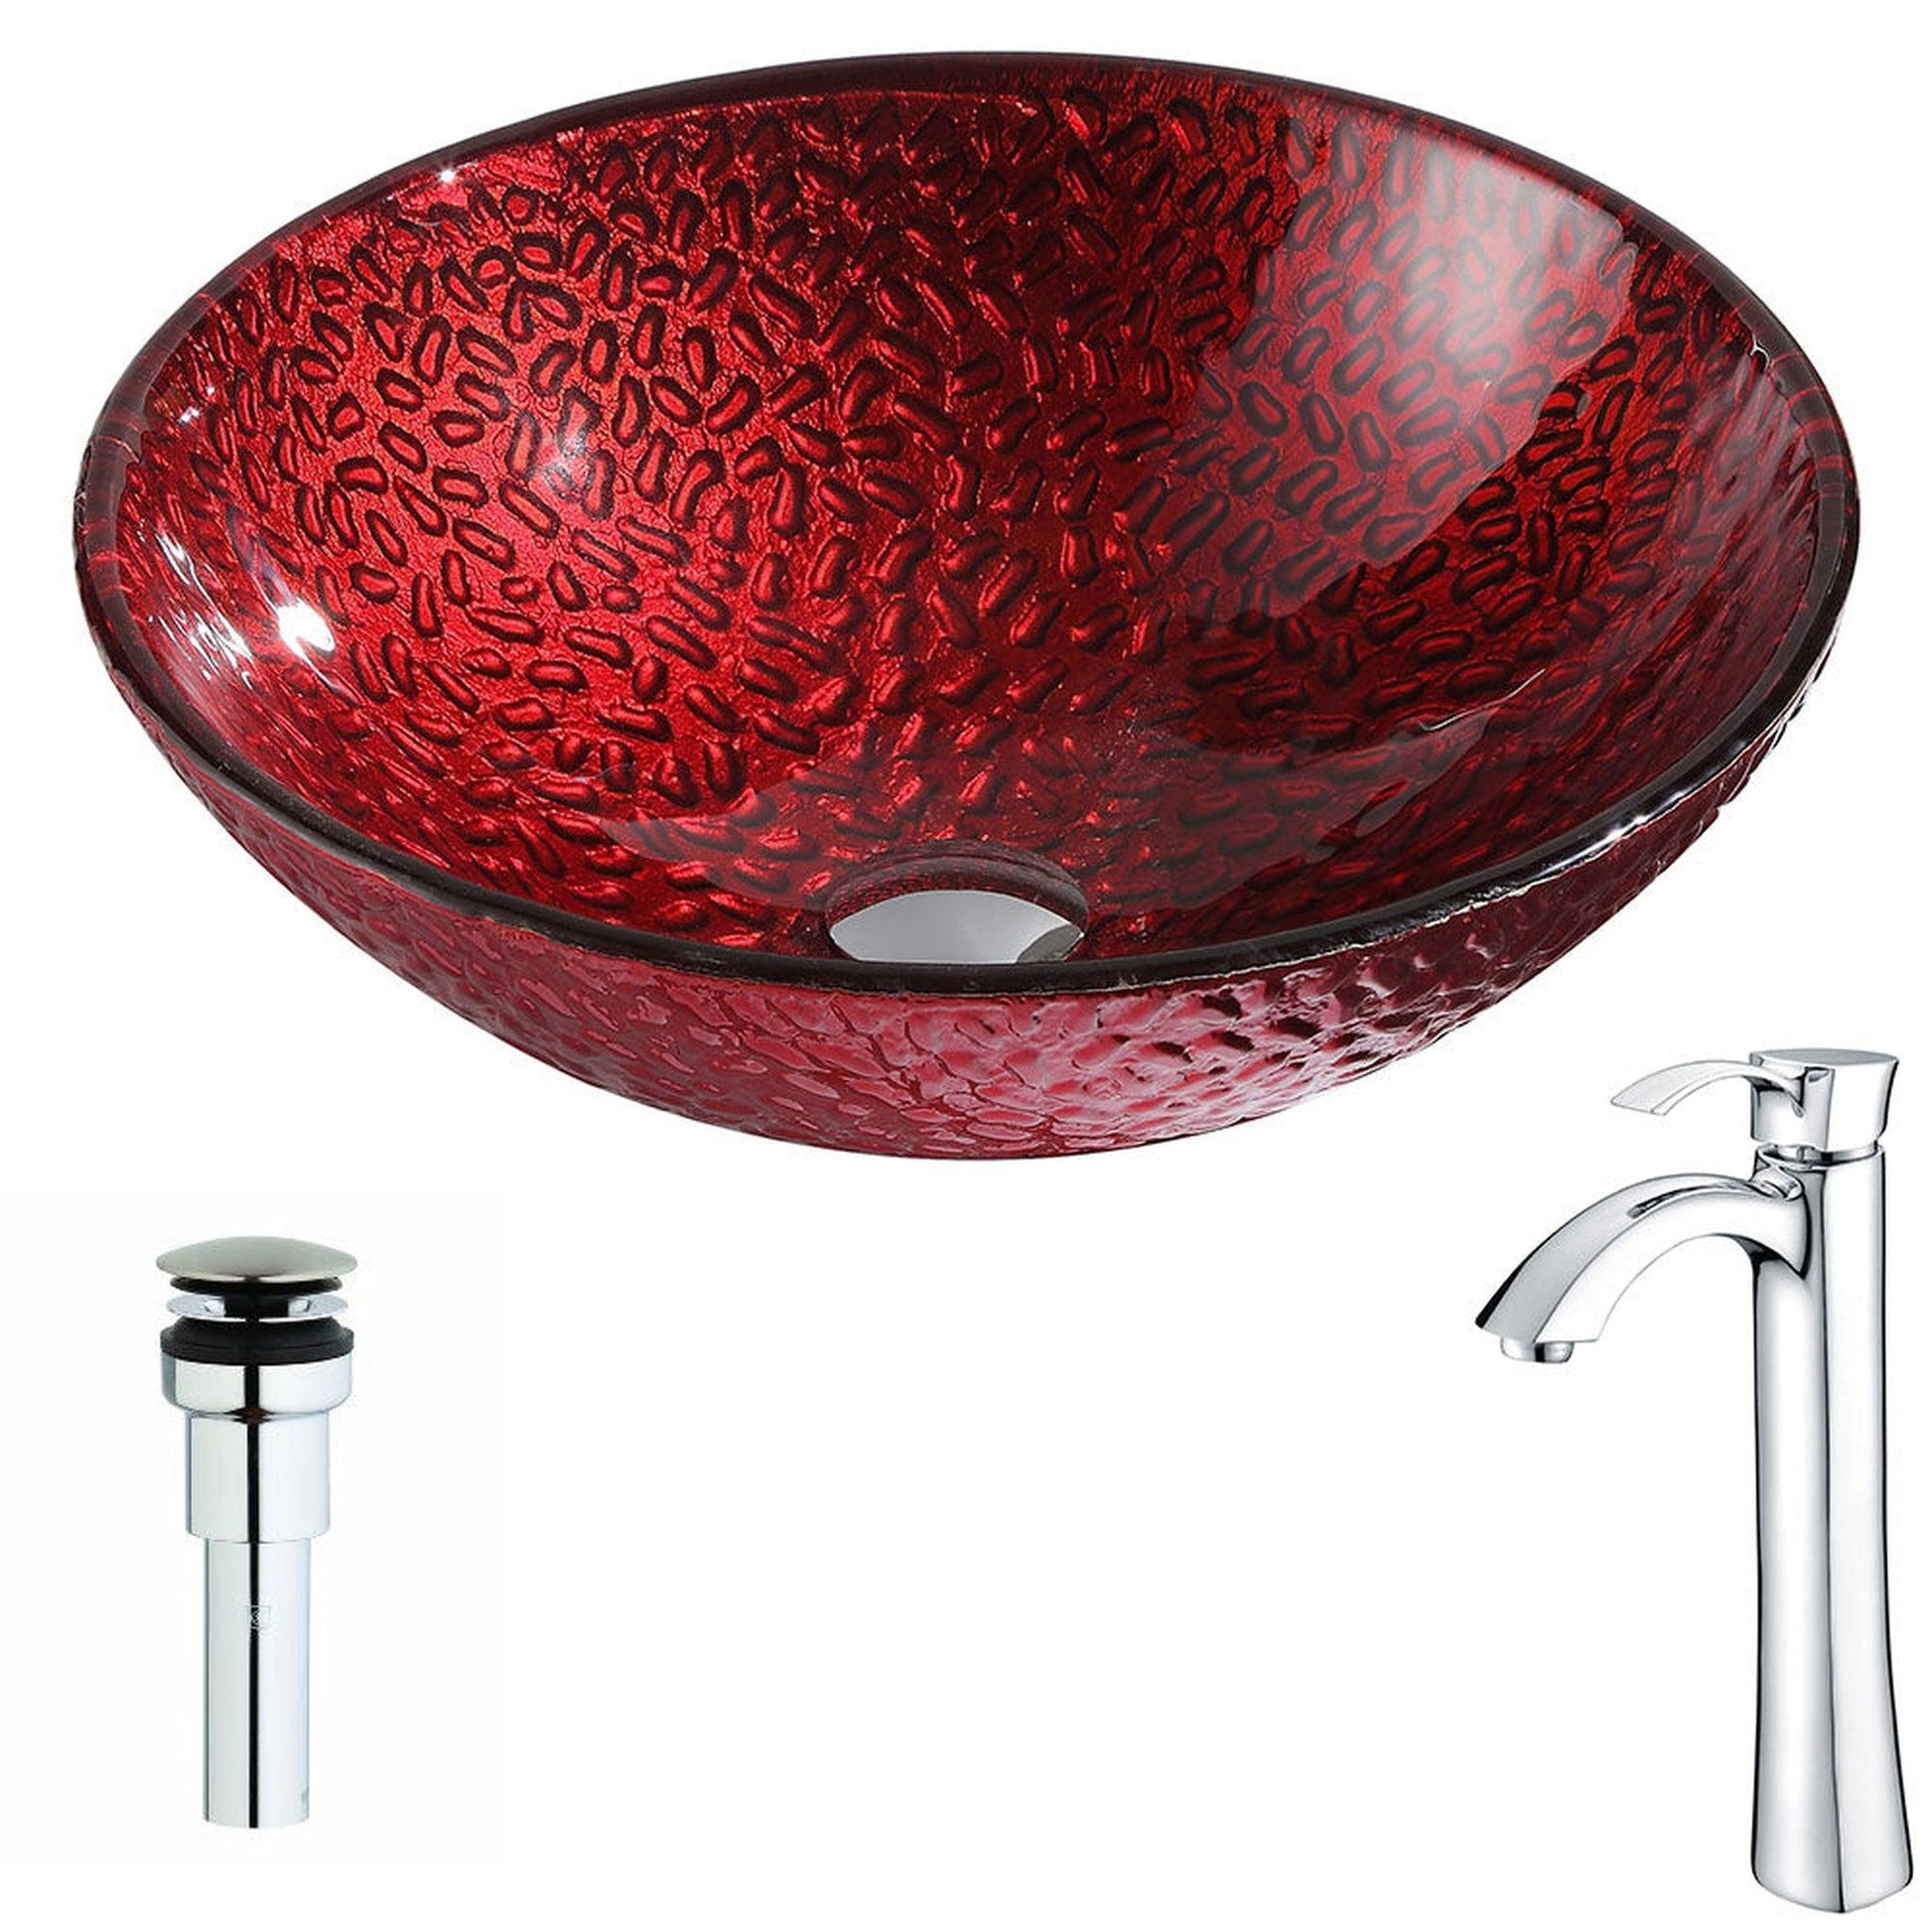 ANZZI Rhythm Series 17" x 17" Round Lustrous Red Deco-Glass Vessel Sink With Polished Chrome Pop-Up Drain and Enti Faucet